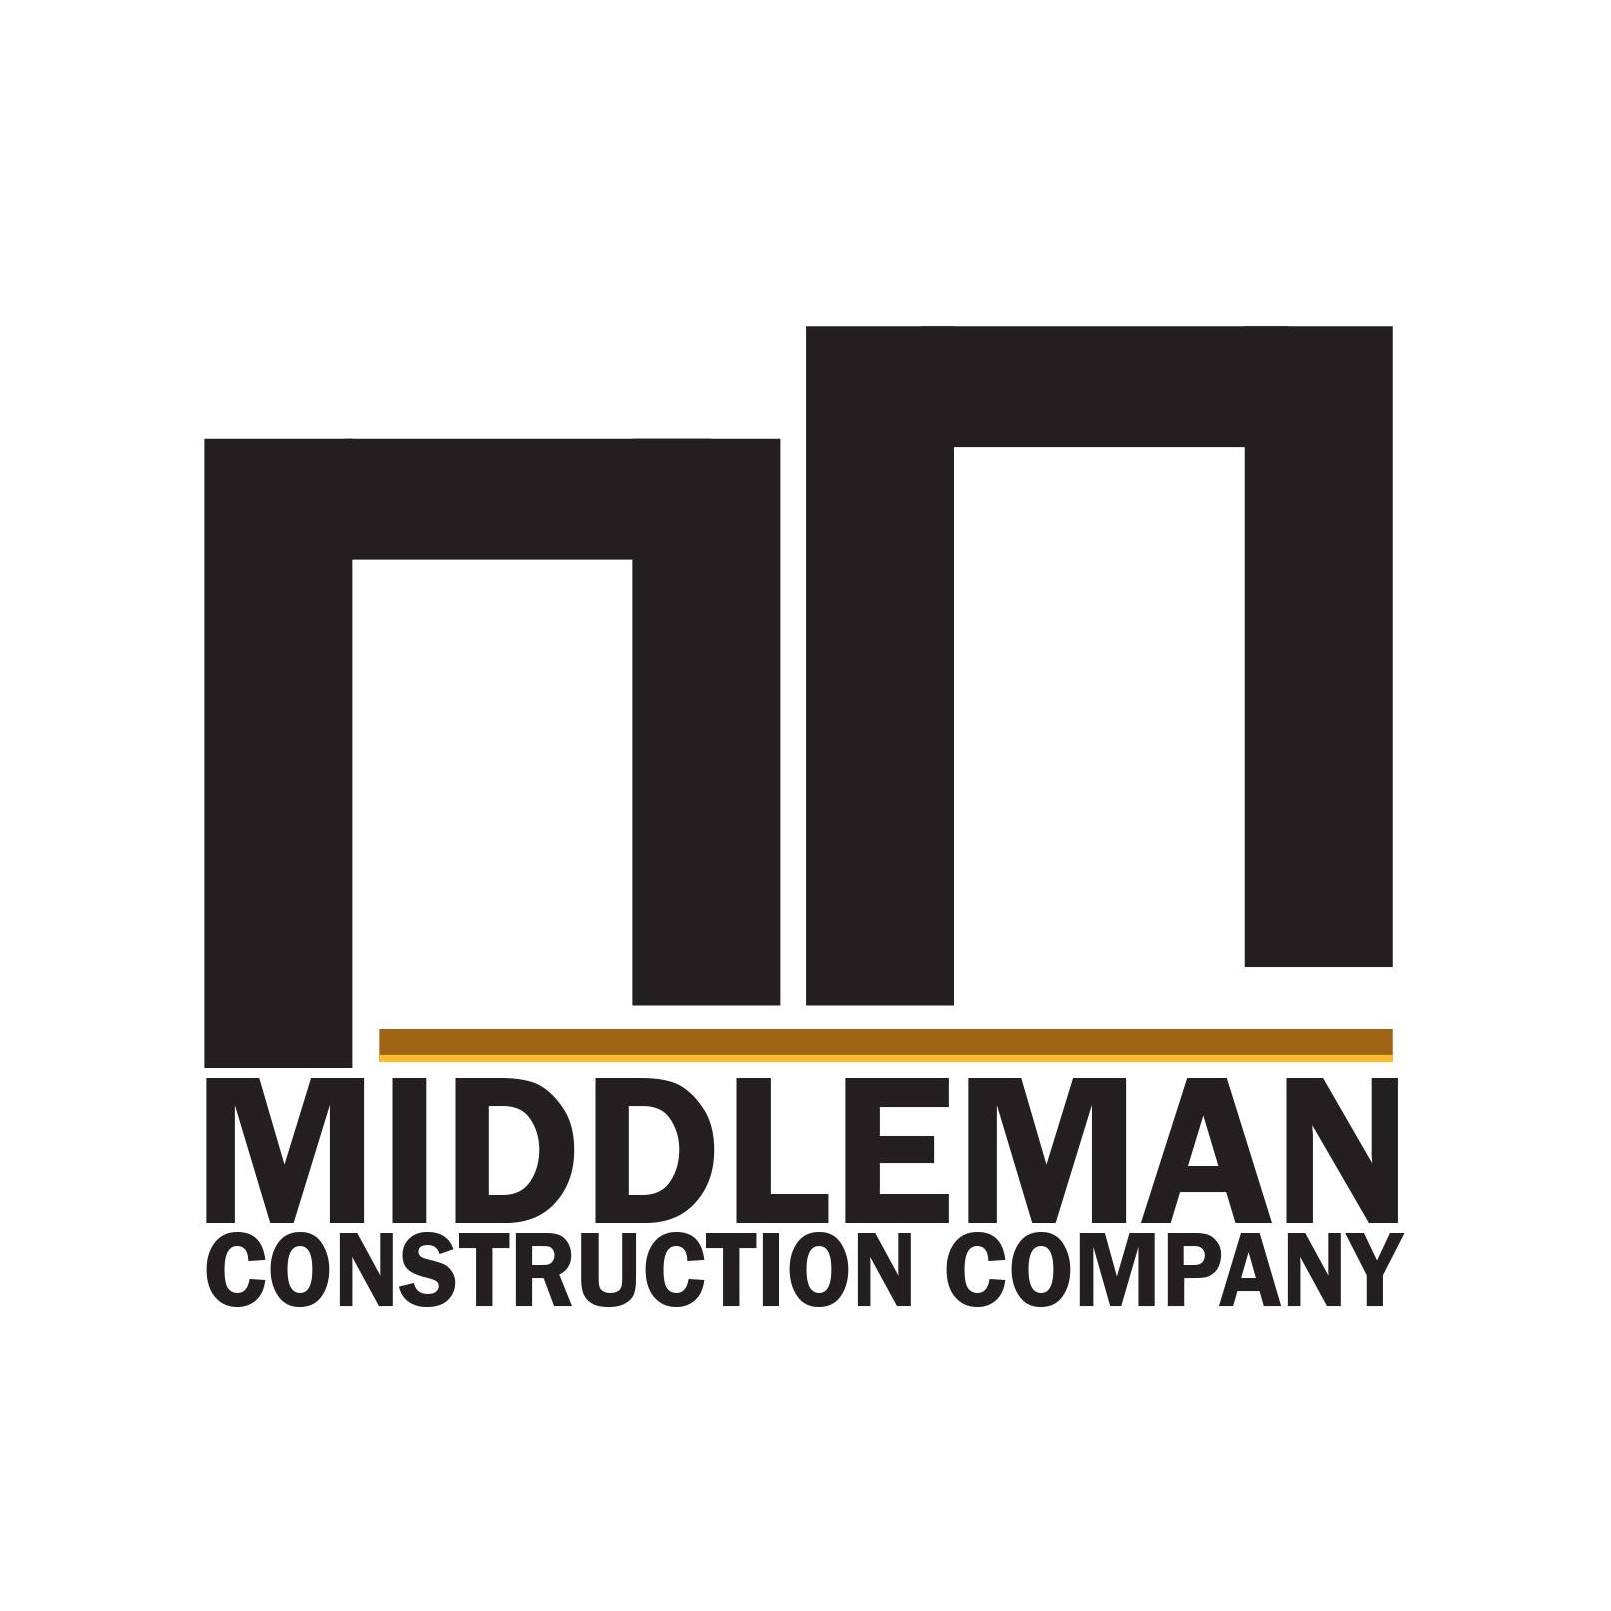 Business logo of Middleman Construction Company LLC